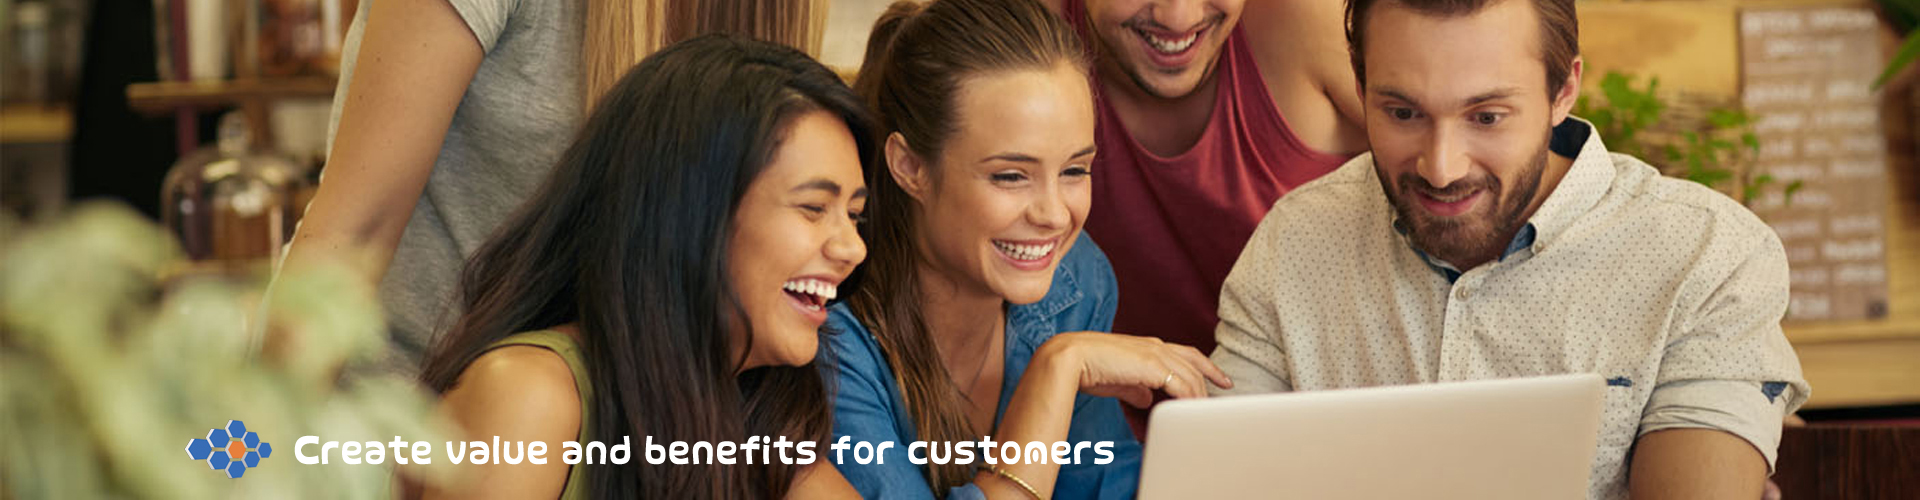 Create value and benefits for customers